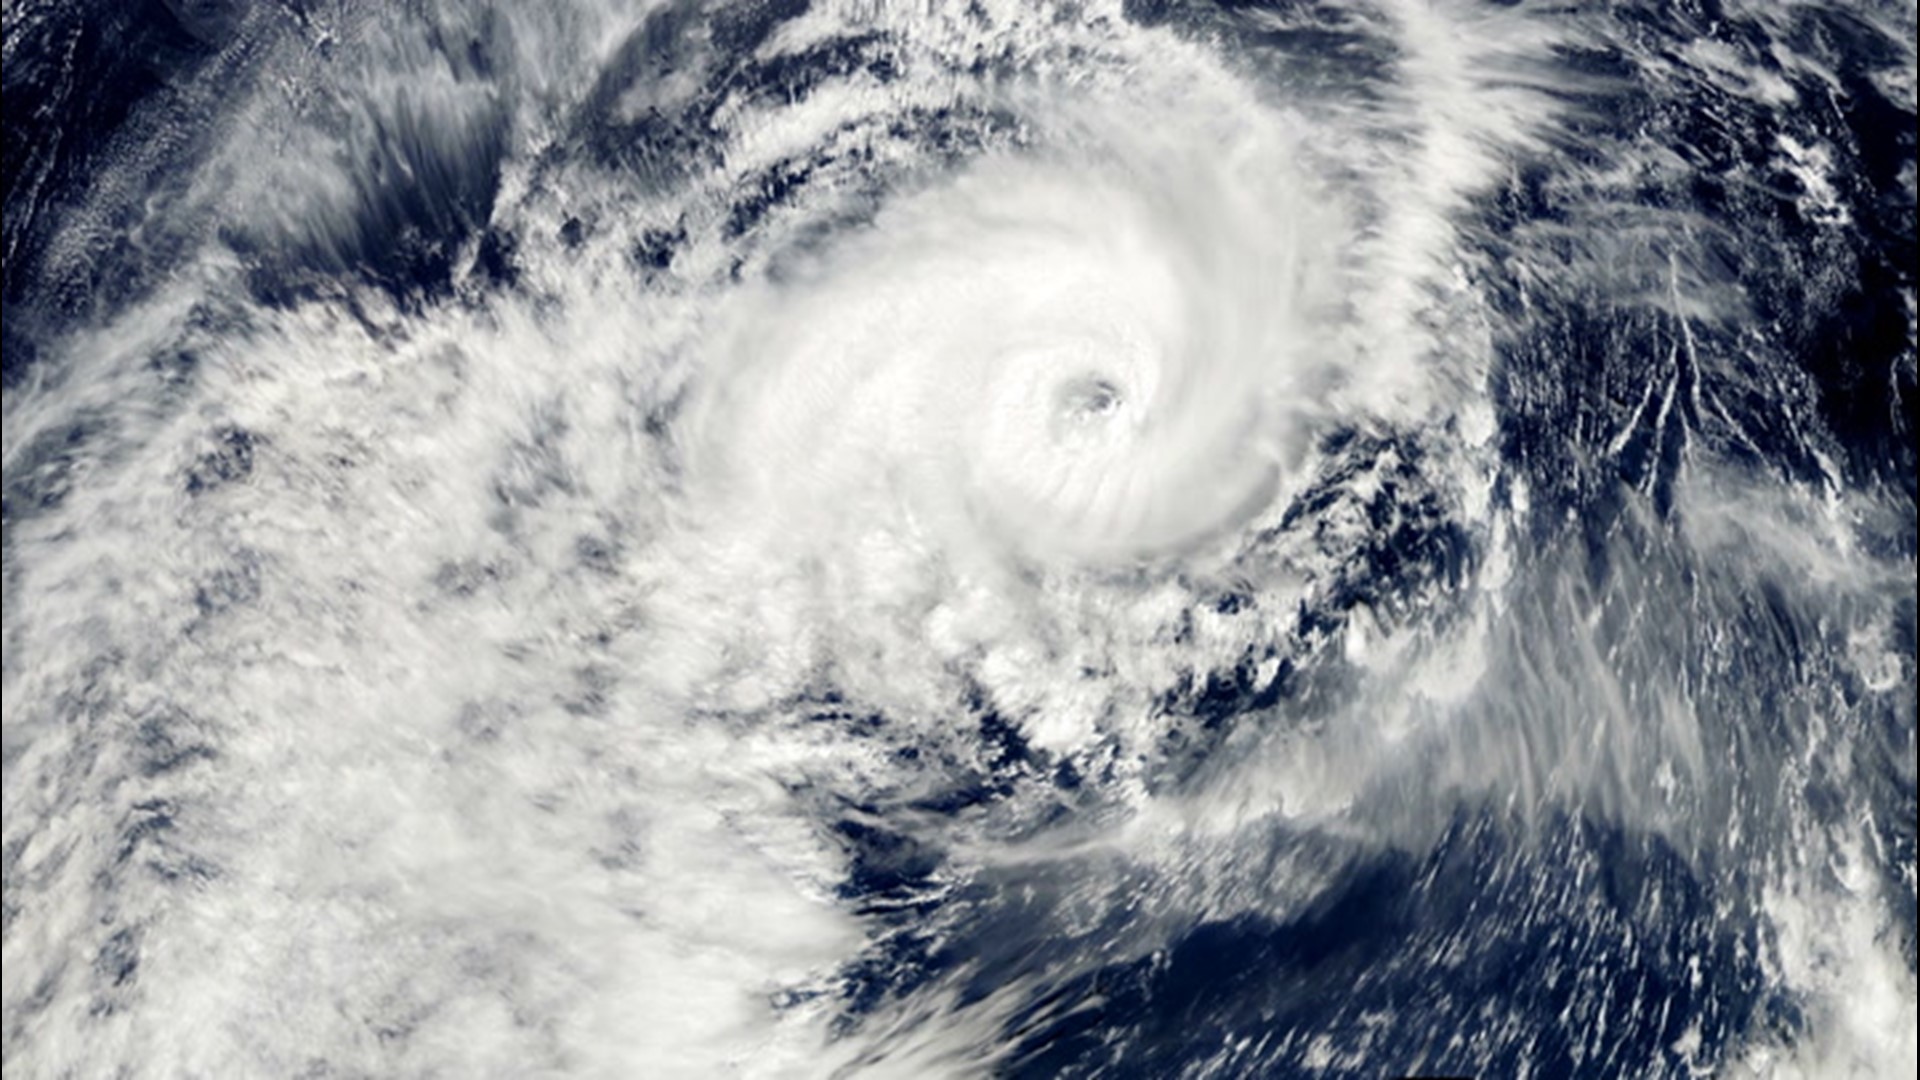 2019's Atlantic hurricane season was a busy one. What do AccuWeather's forecasters think 2020 will look like? Tune into the AccuWeather Network and AccuWeather.com on March 25 to find out.